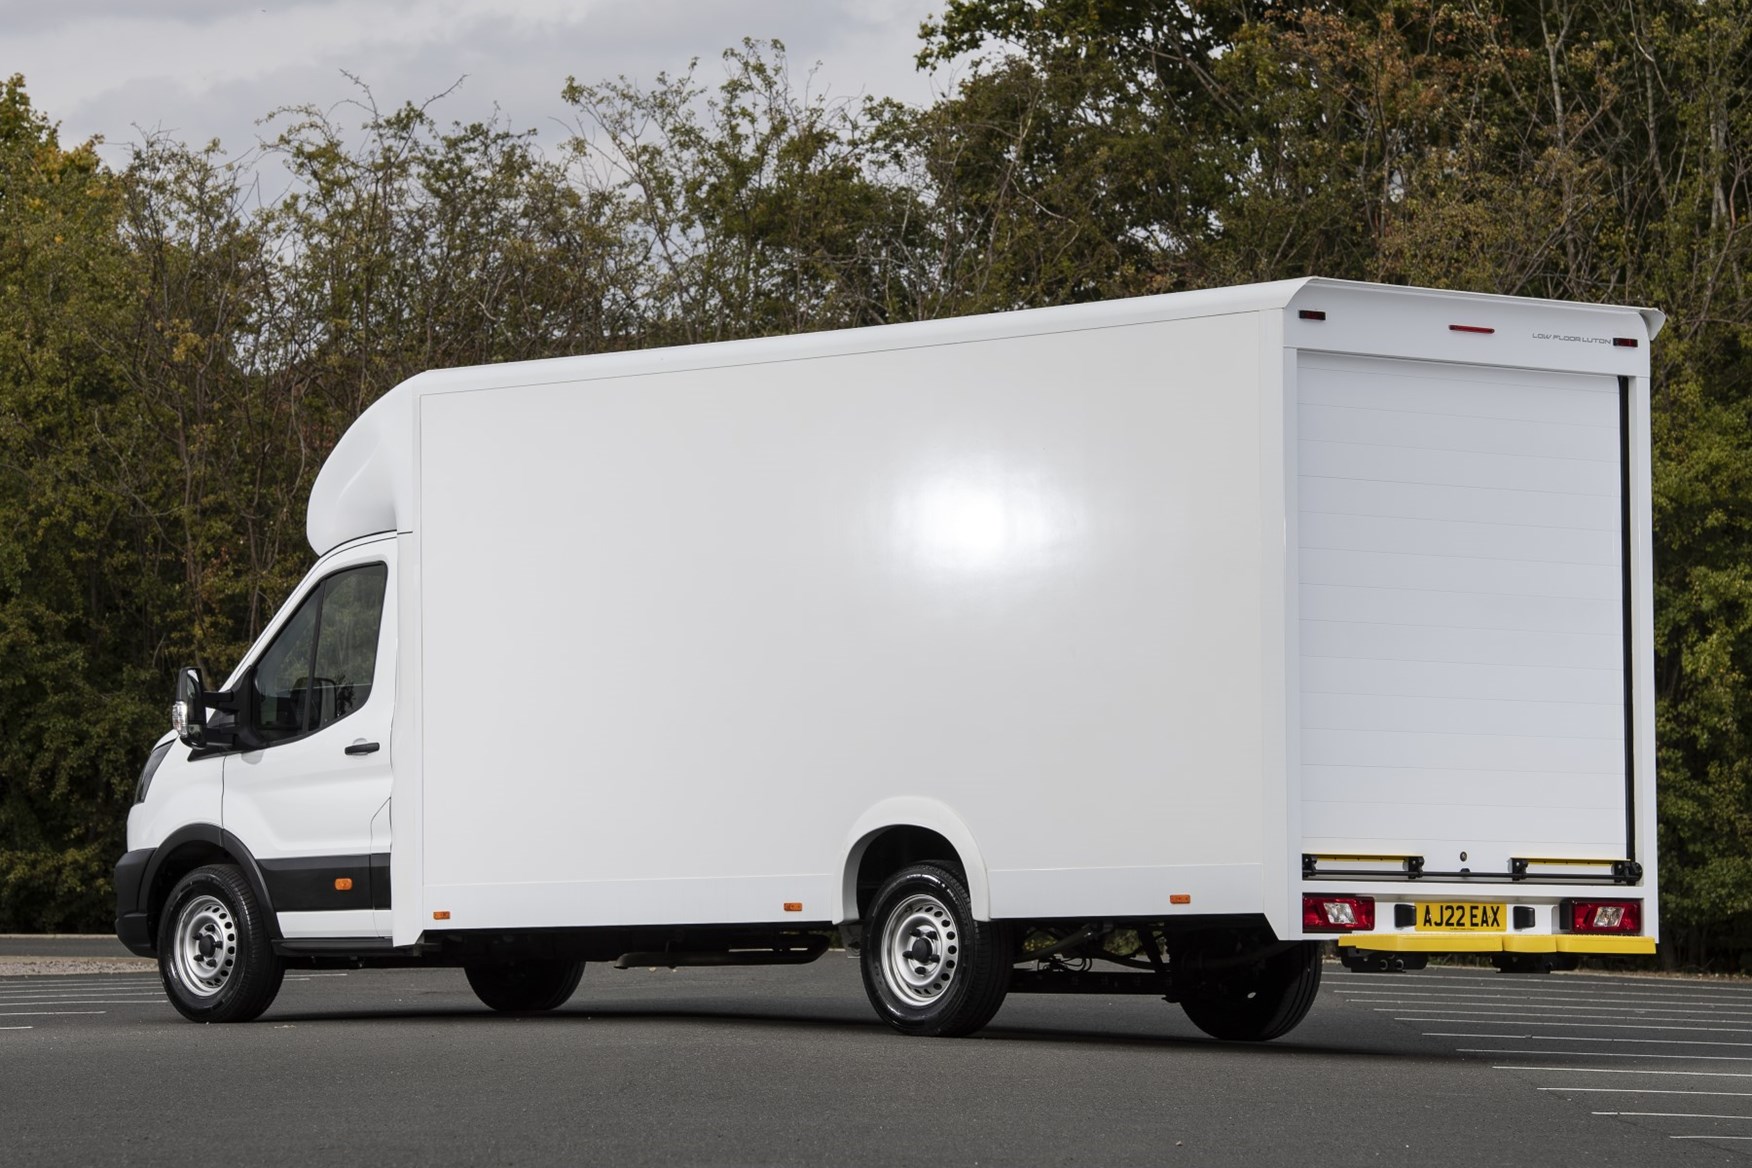 Fiat Ducato 2021 review: Mid-wheelbase GVM test - Updated 3.5t van tested  with plenty of weight!